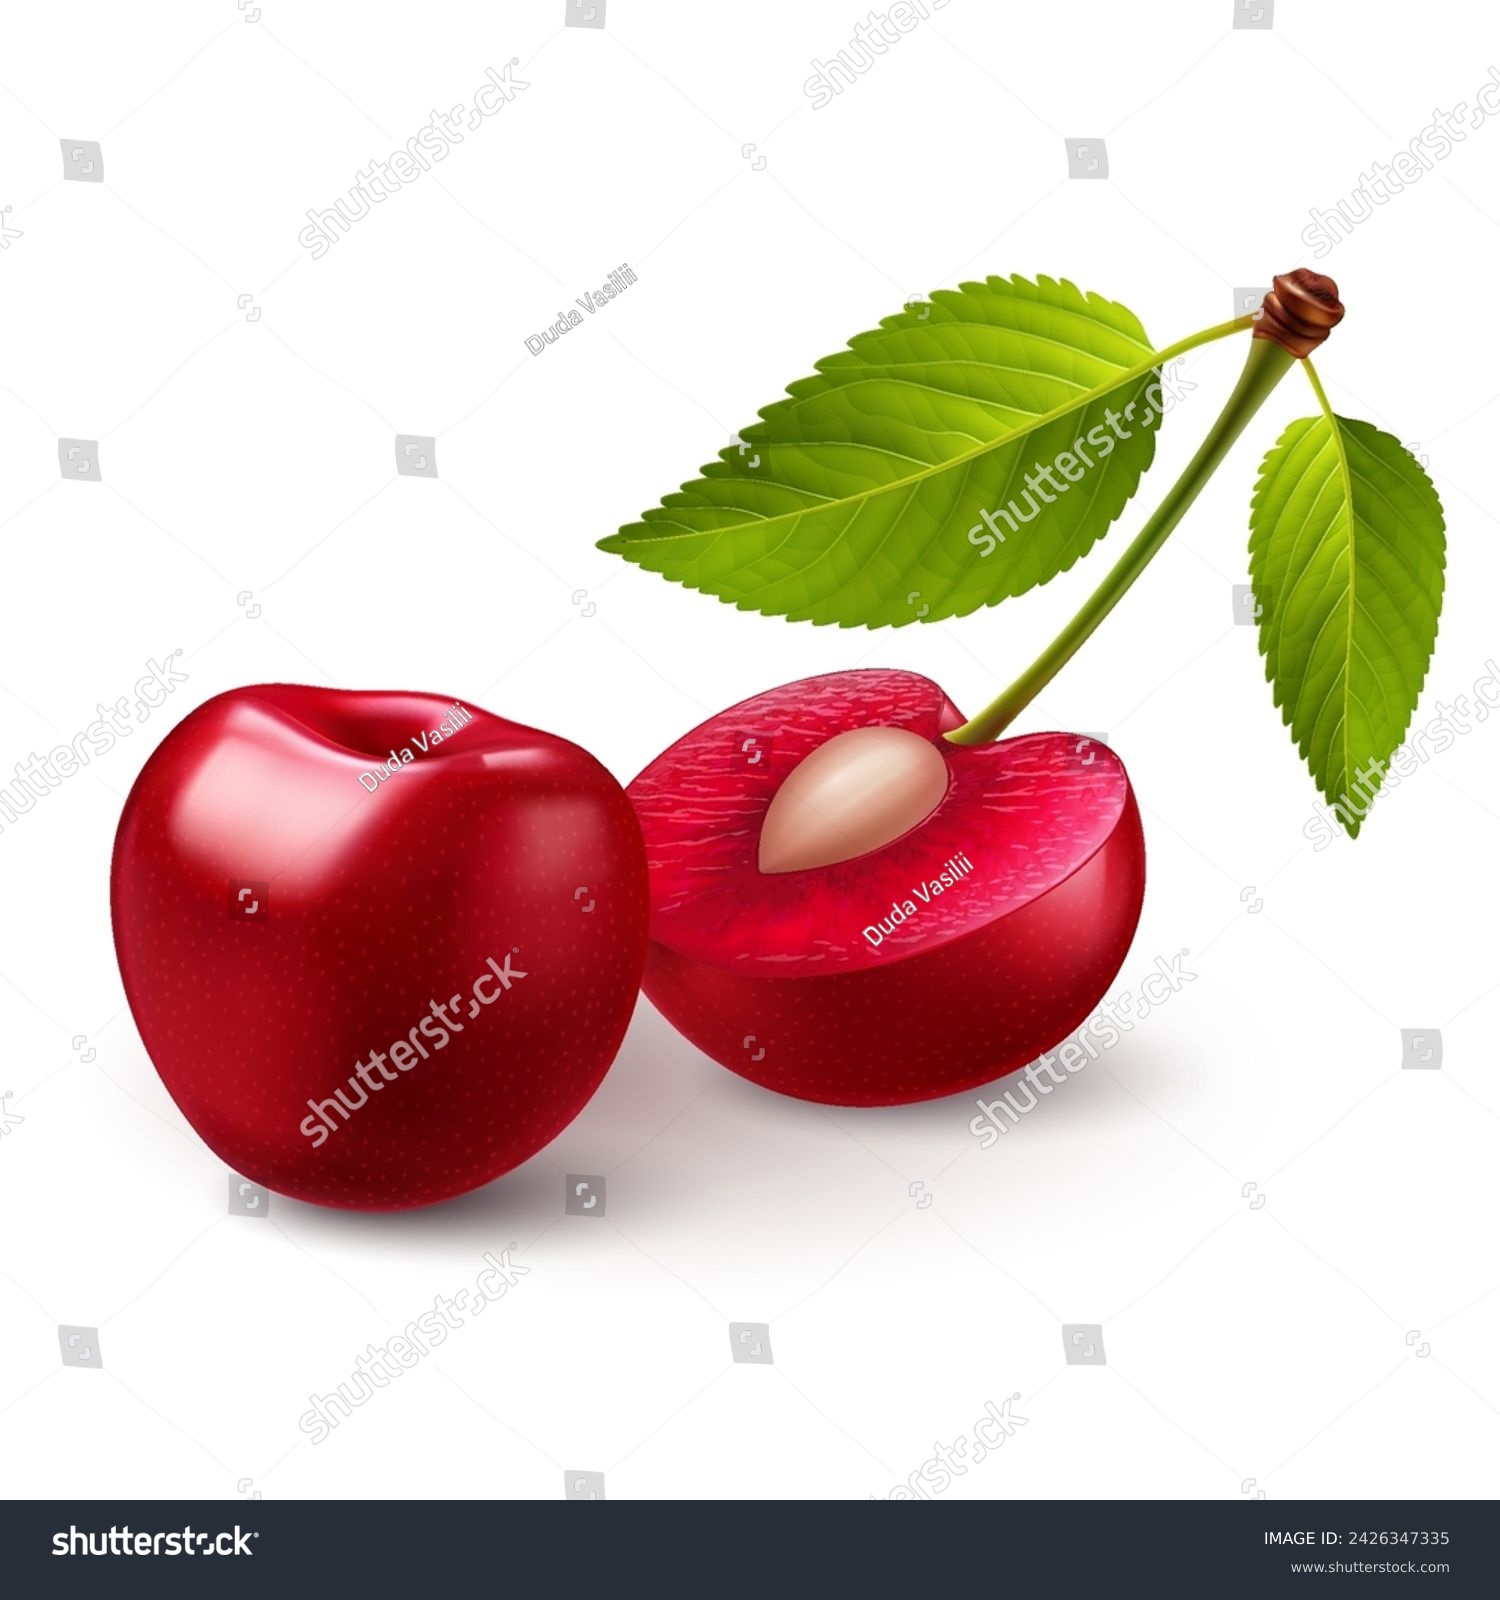 Ripe red sweet cherries with smooth skin, green leaves, juicy light red flesh, and small pits #2426347335